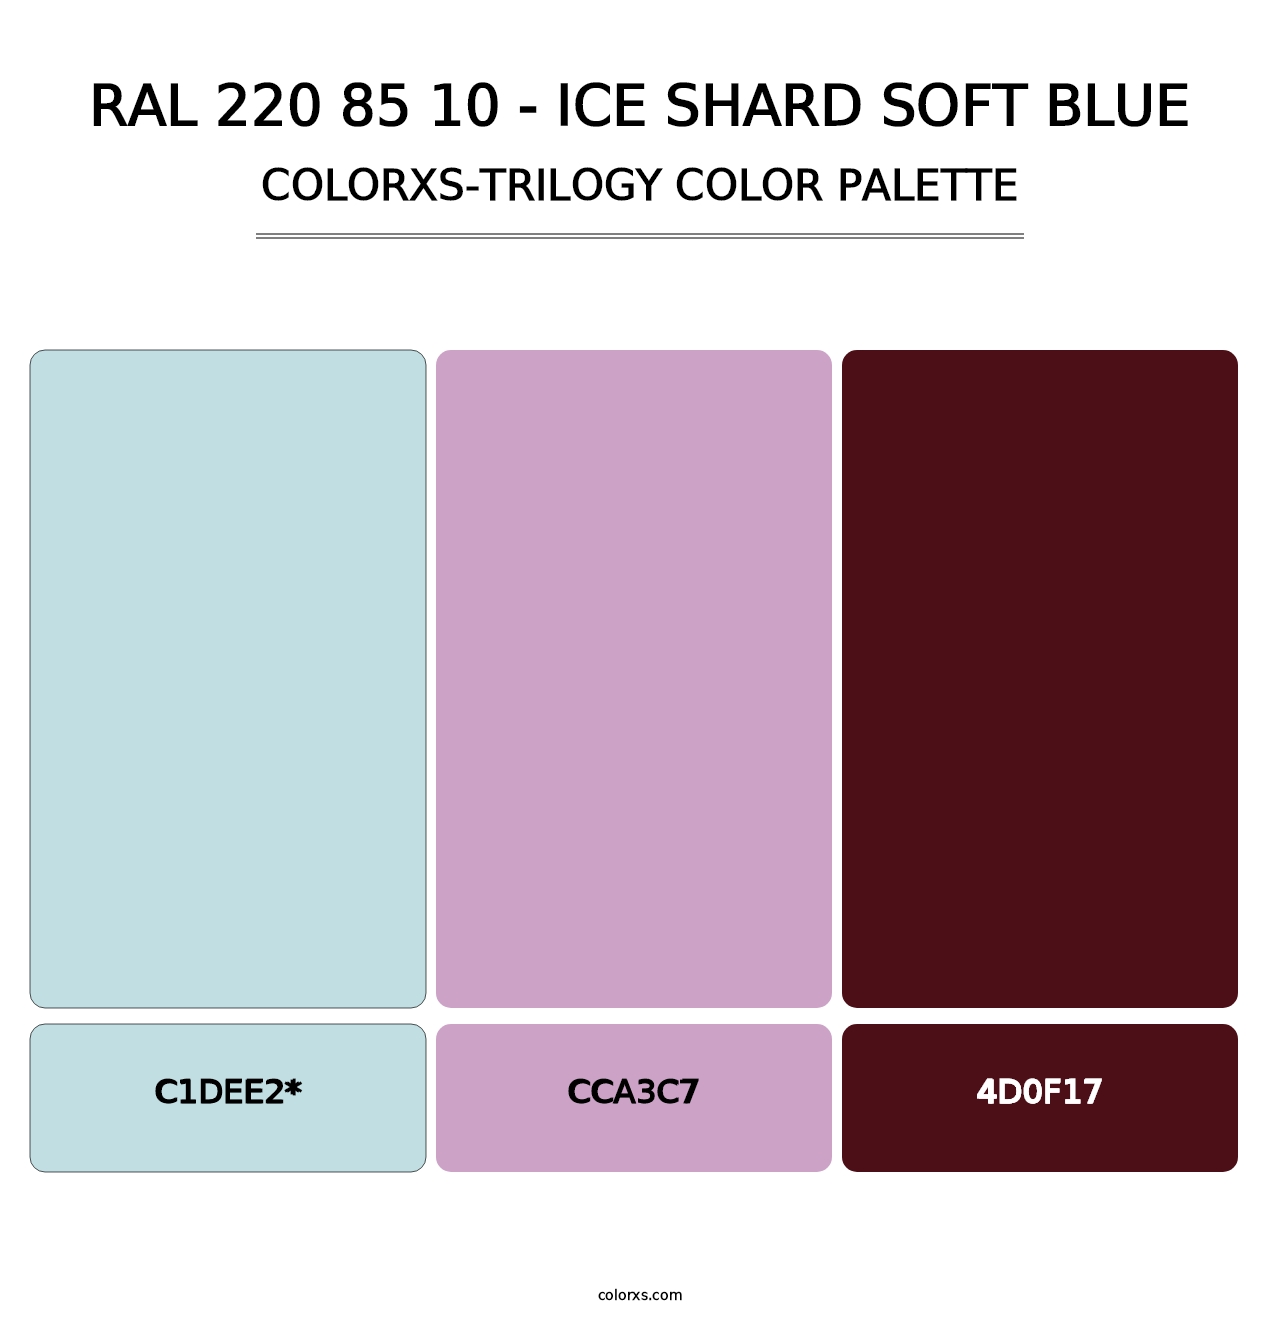 RAL 220 85 10 - Ice Shard Soft Blue - Colorxs Trilogy Palette